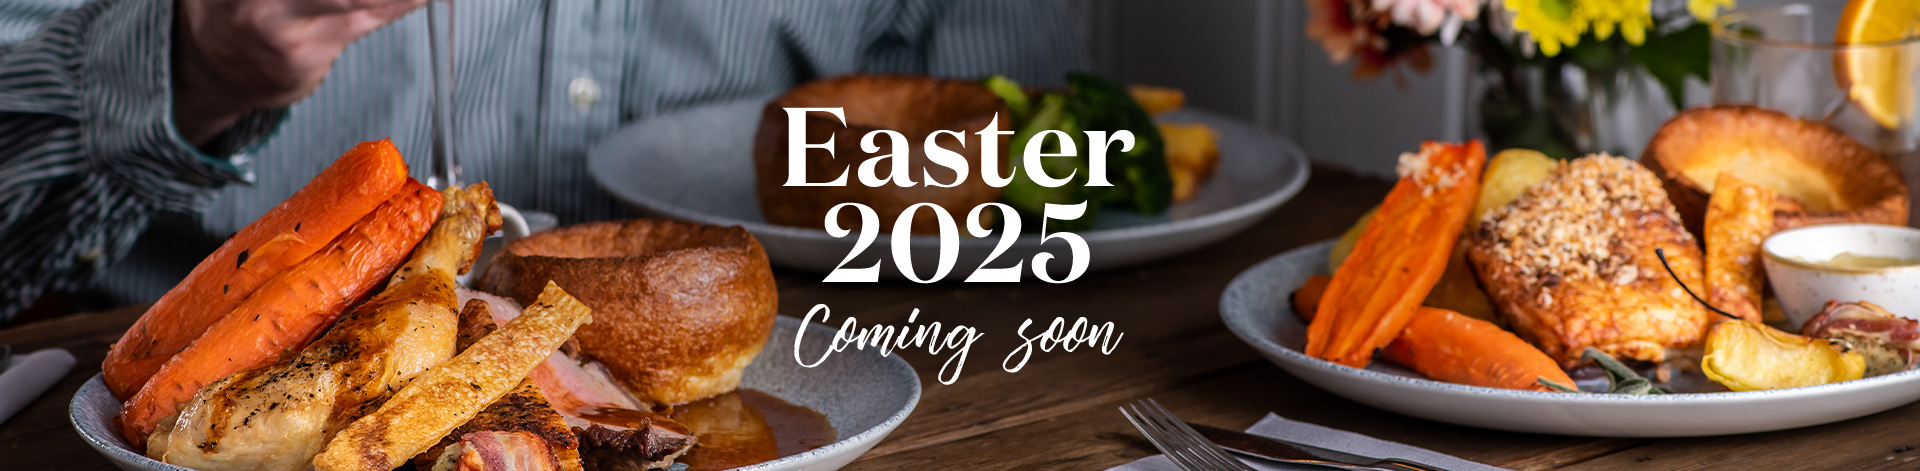 Easter at The Boat Inn in Doncaster